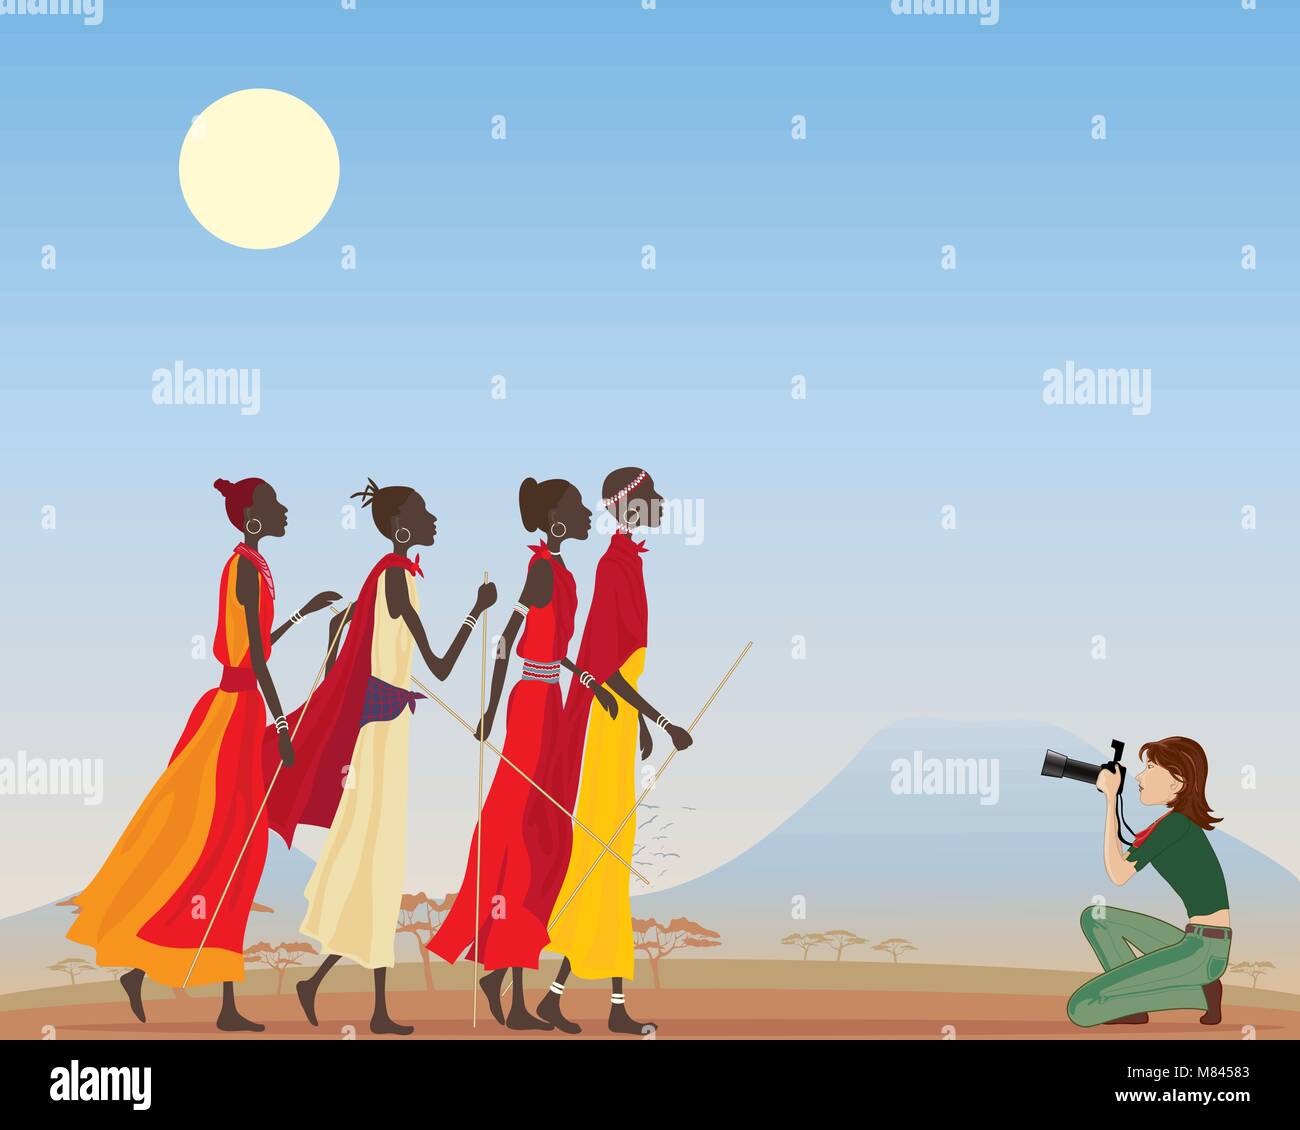 a vector illustration in eps 10 format of a female photographic journalist taking pictures of Masai women in a Kenya landscape Stock Vector